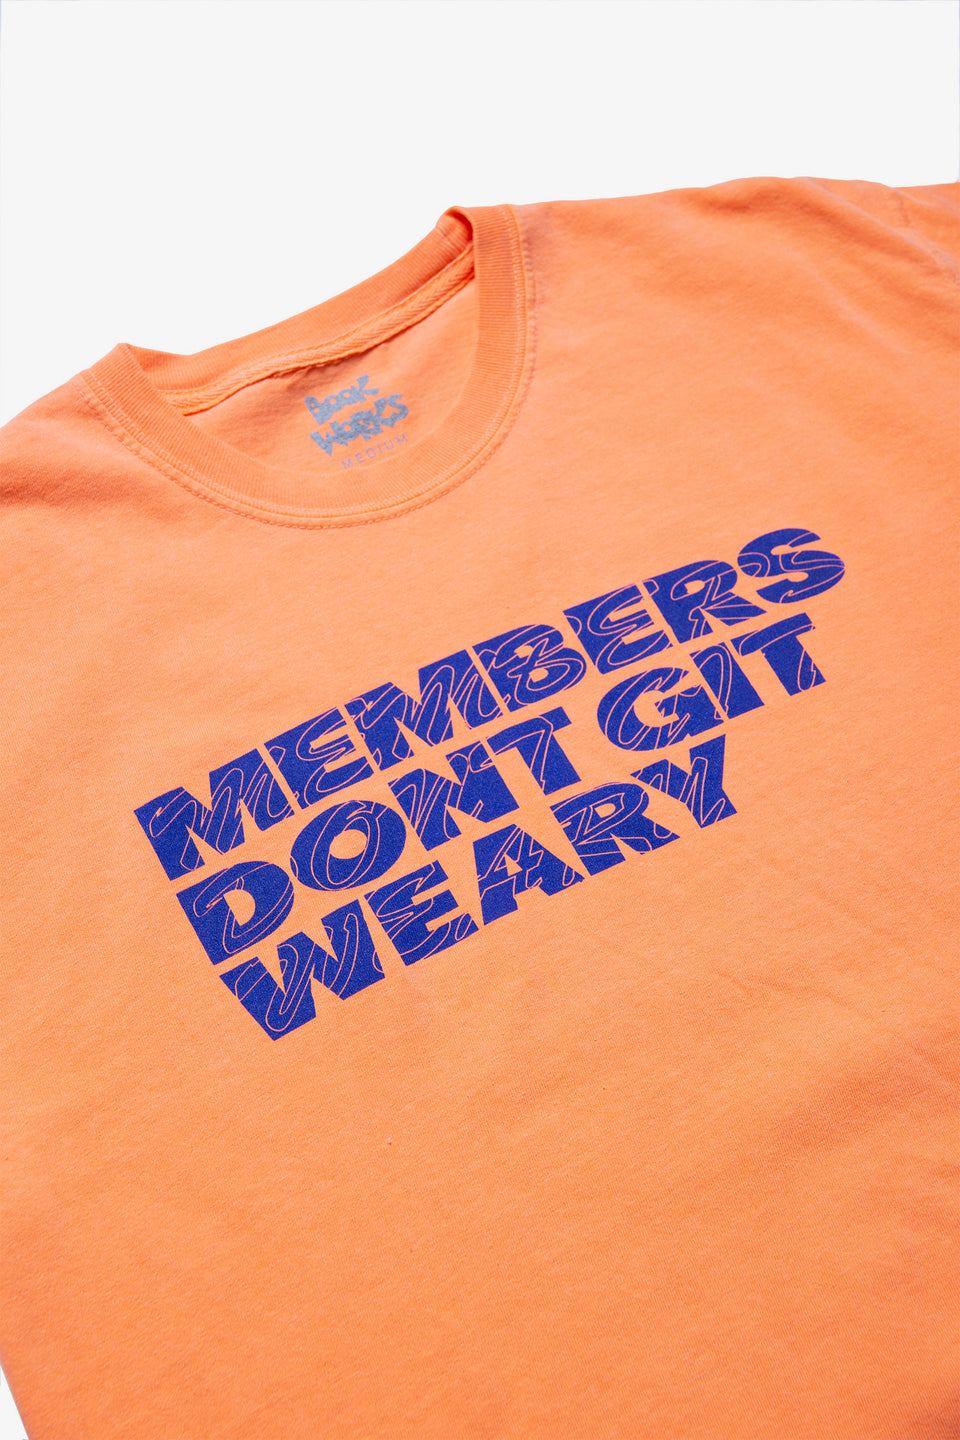 Book Works Members Don't Git Weary Tee Calculus Victoria BC Canada